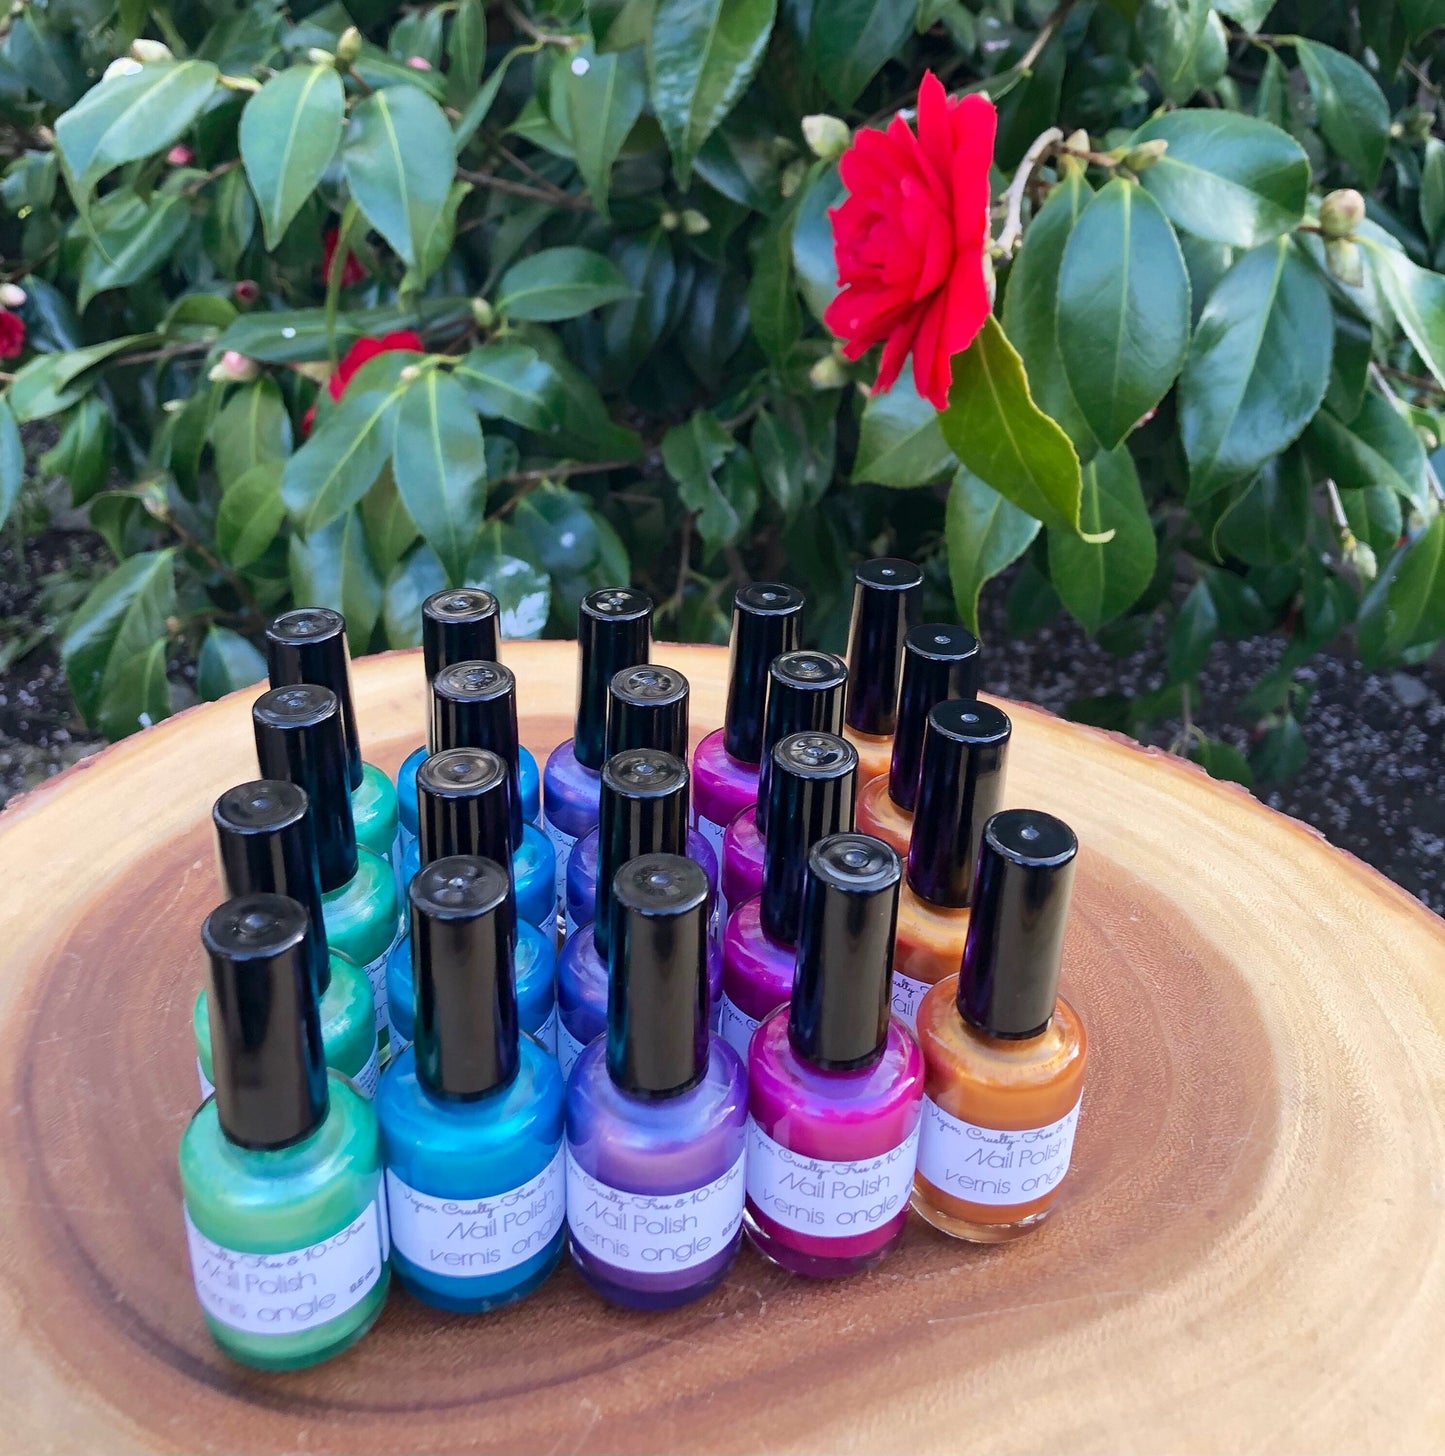 Nail polish/10-Free Nail Polish/Free from 10 Main Hormone Disruptors/Ethically Sourced Mica/Vegan/Cruelty Free/Handcrafted in Victoria, B.C.